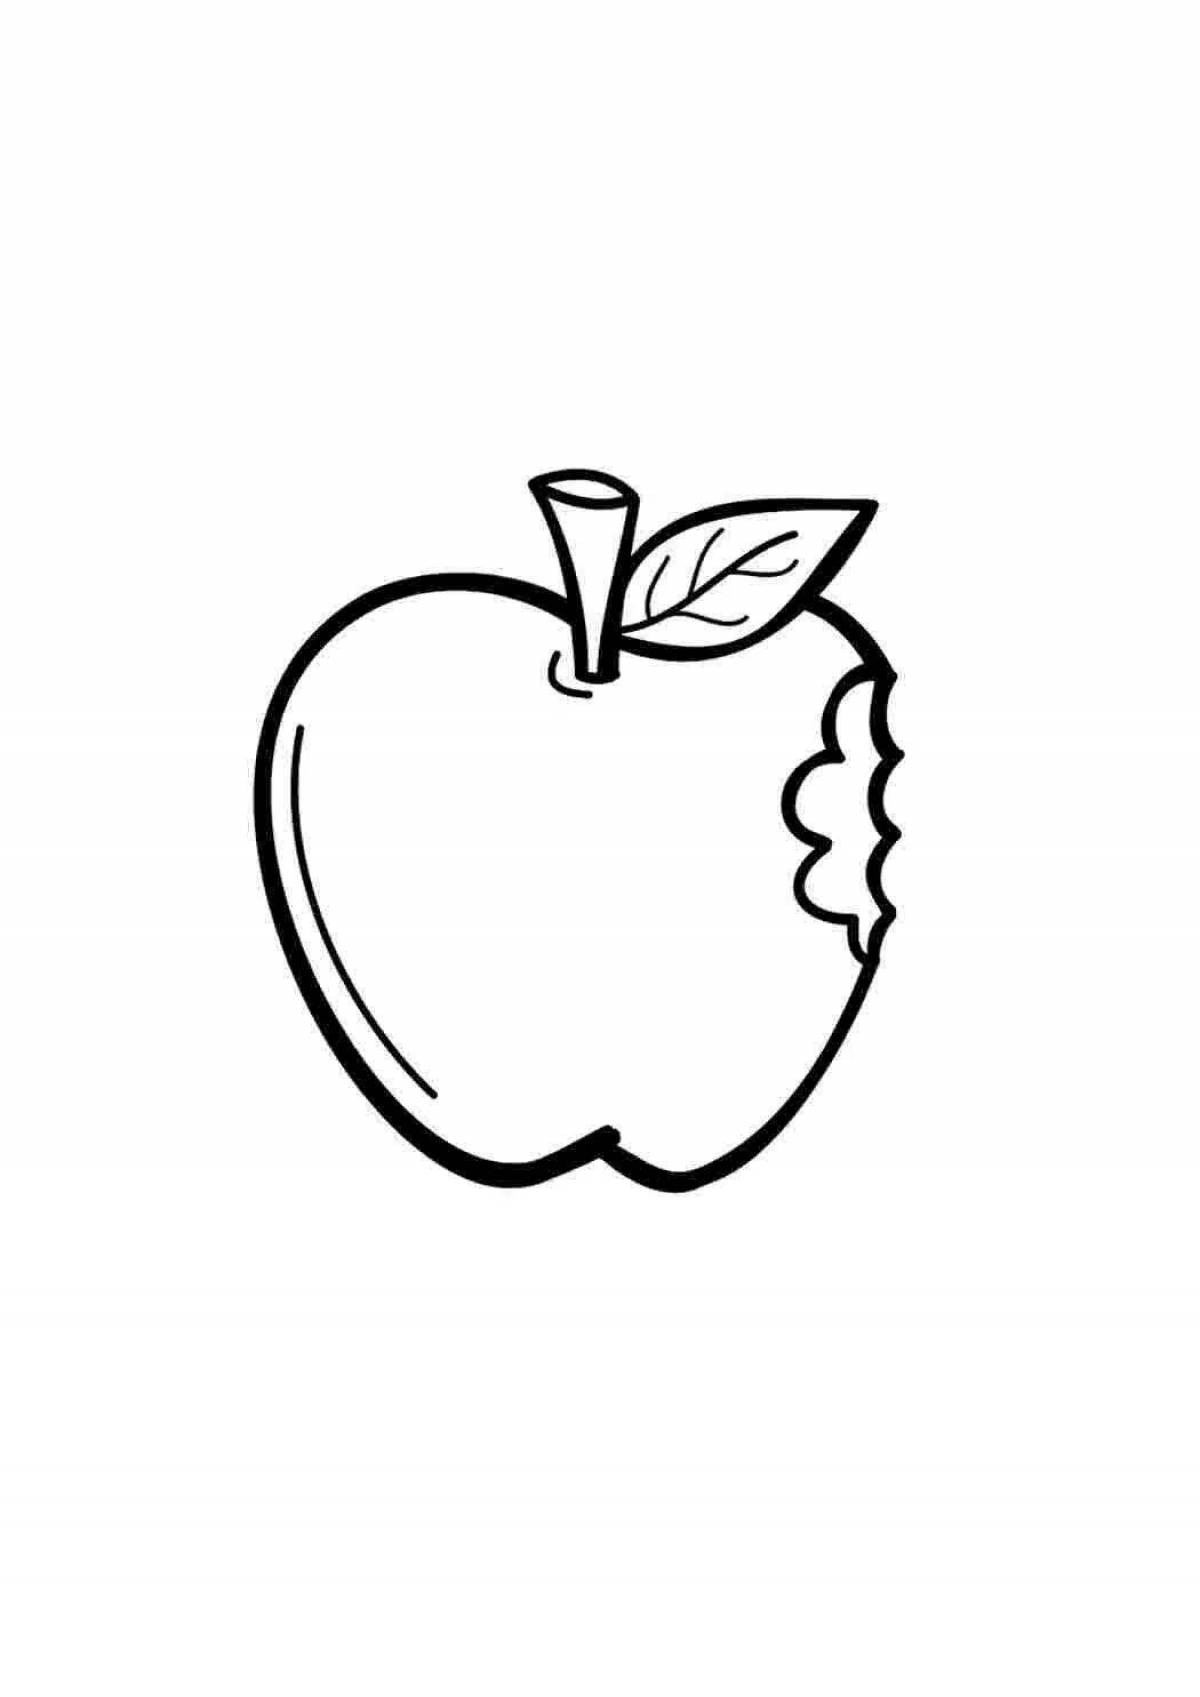 Coloring book glowing apple icon